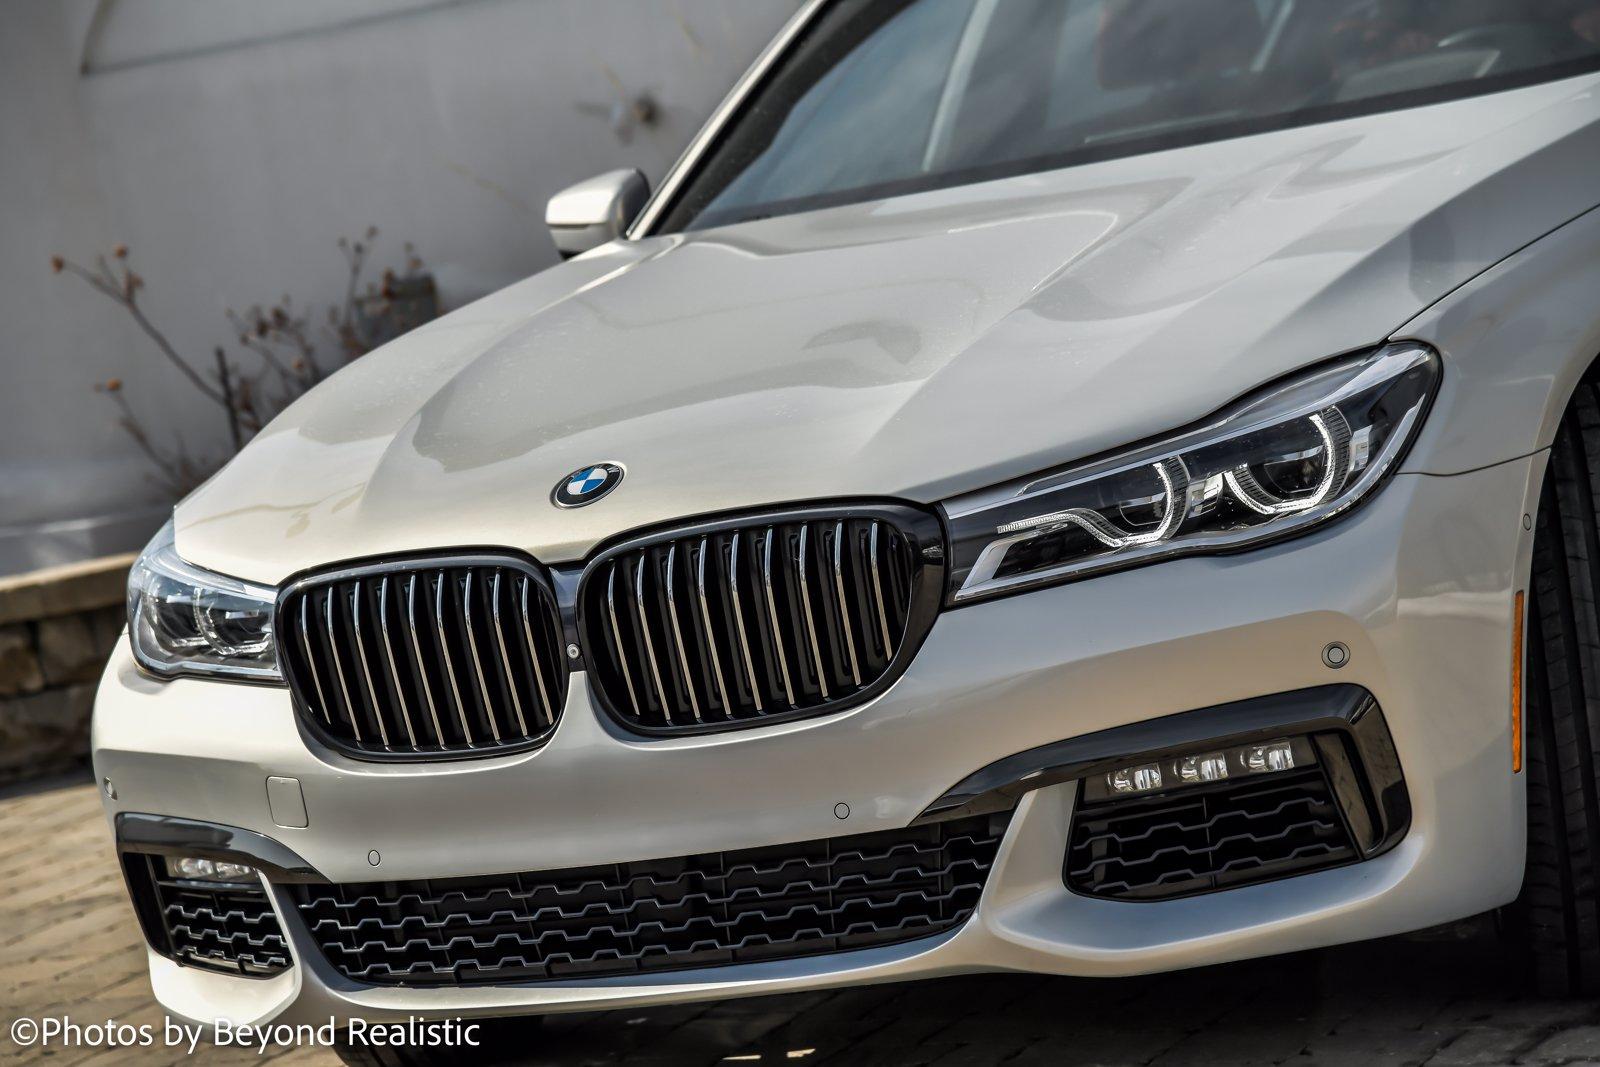 Used 2019 BMW 7 Series 750i xDrive M-Sport Executive Rear Seat Ent | Downers Grove, IL